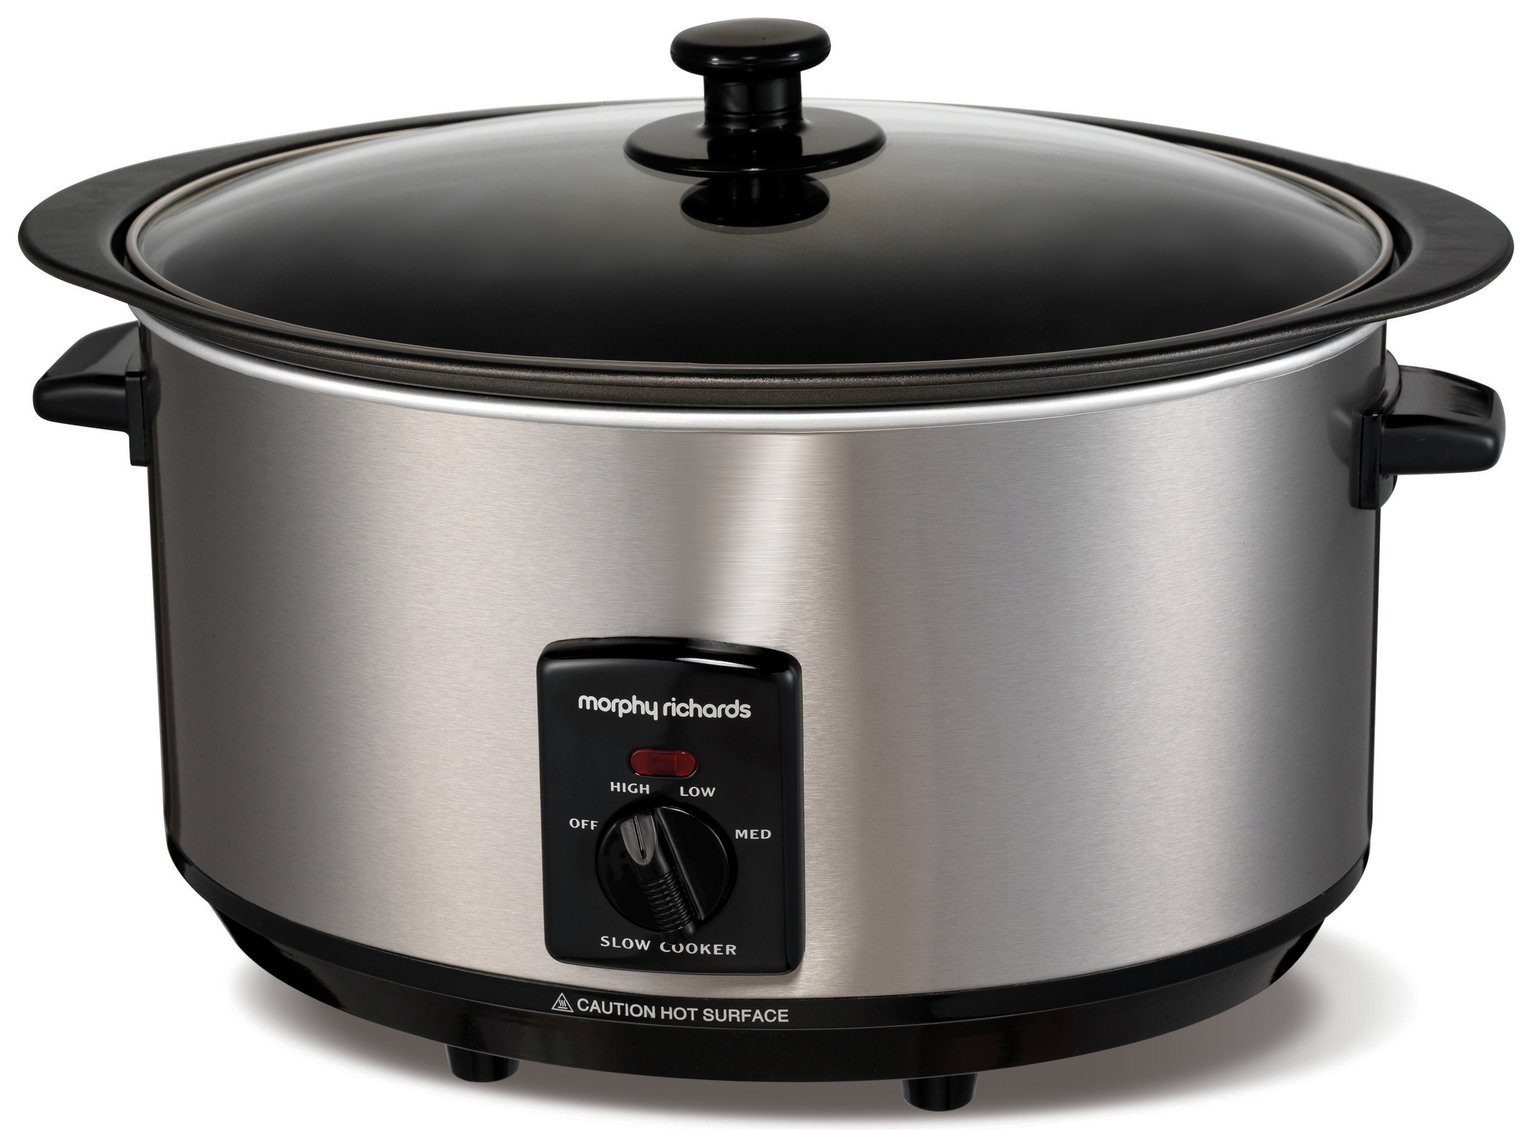 Slow cooker morphy